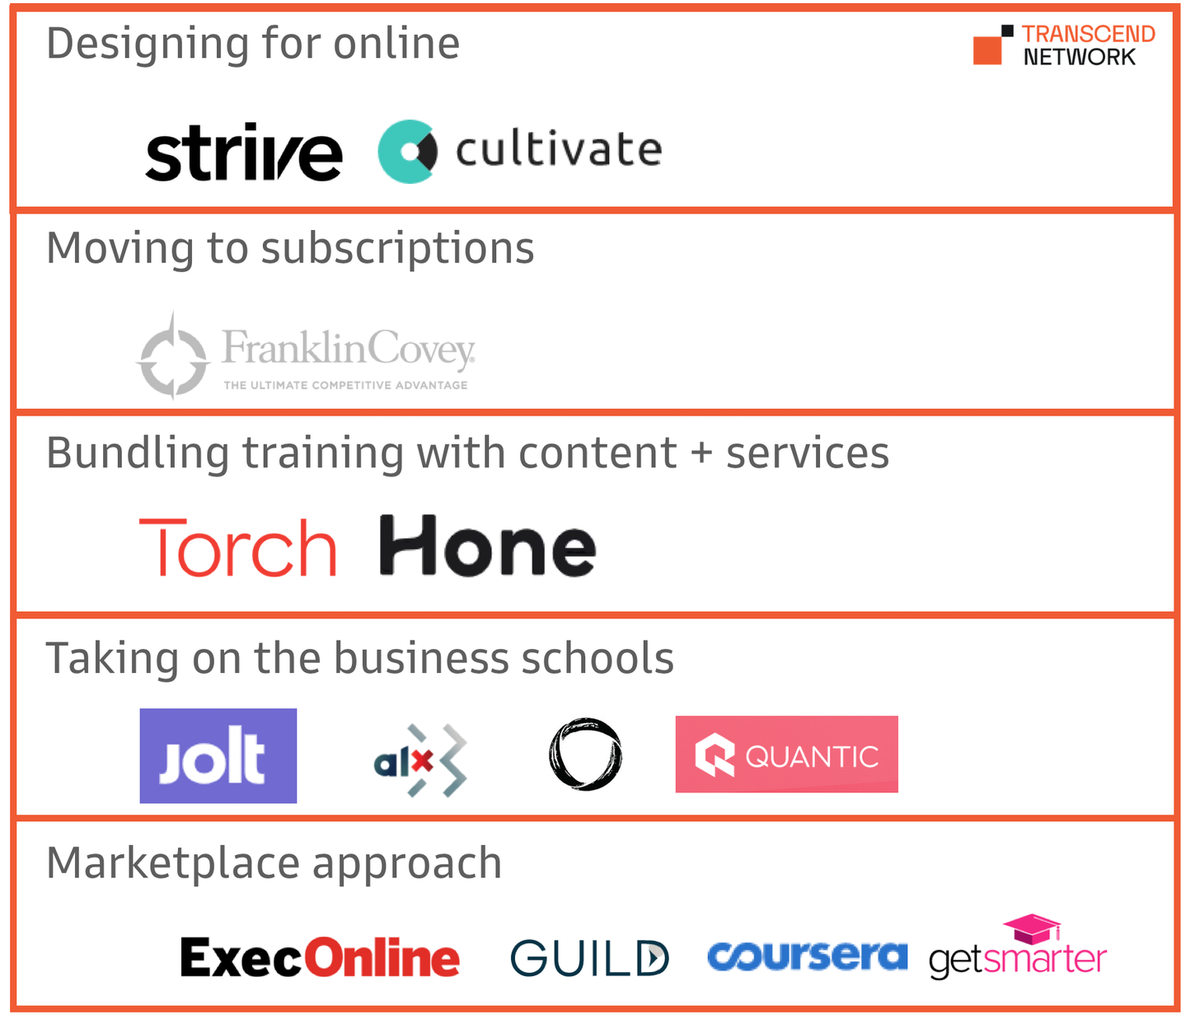 Startups are slowly trickling in: building online-first programming, bundling it with other learning content and community, and going after business schools and large consulting firms. Some exciting projects:  @StriveTalent  @HoneHQ  @torchlabs  @minervaproject  @ALXapp  @jolt_io